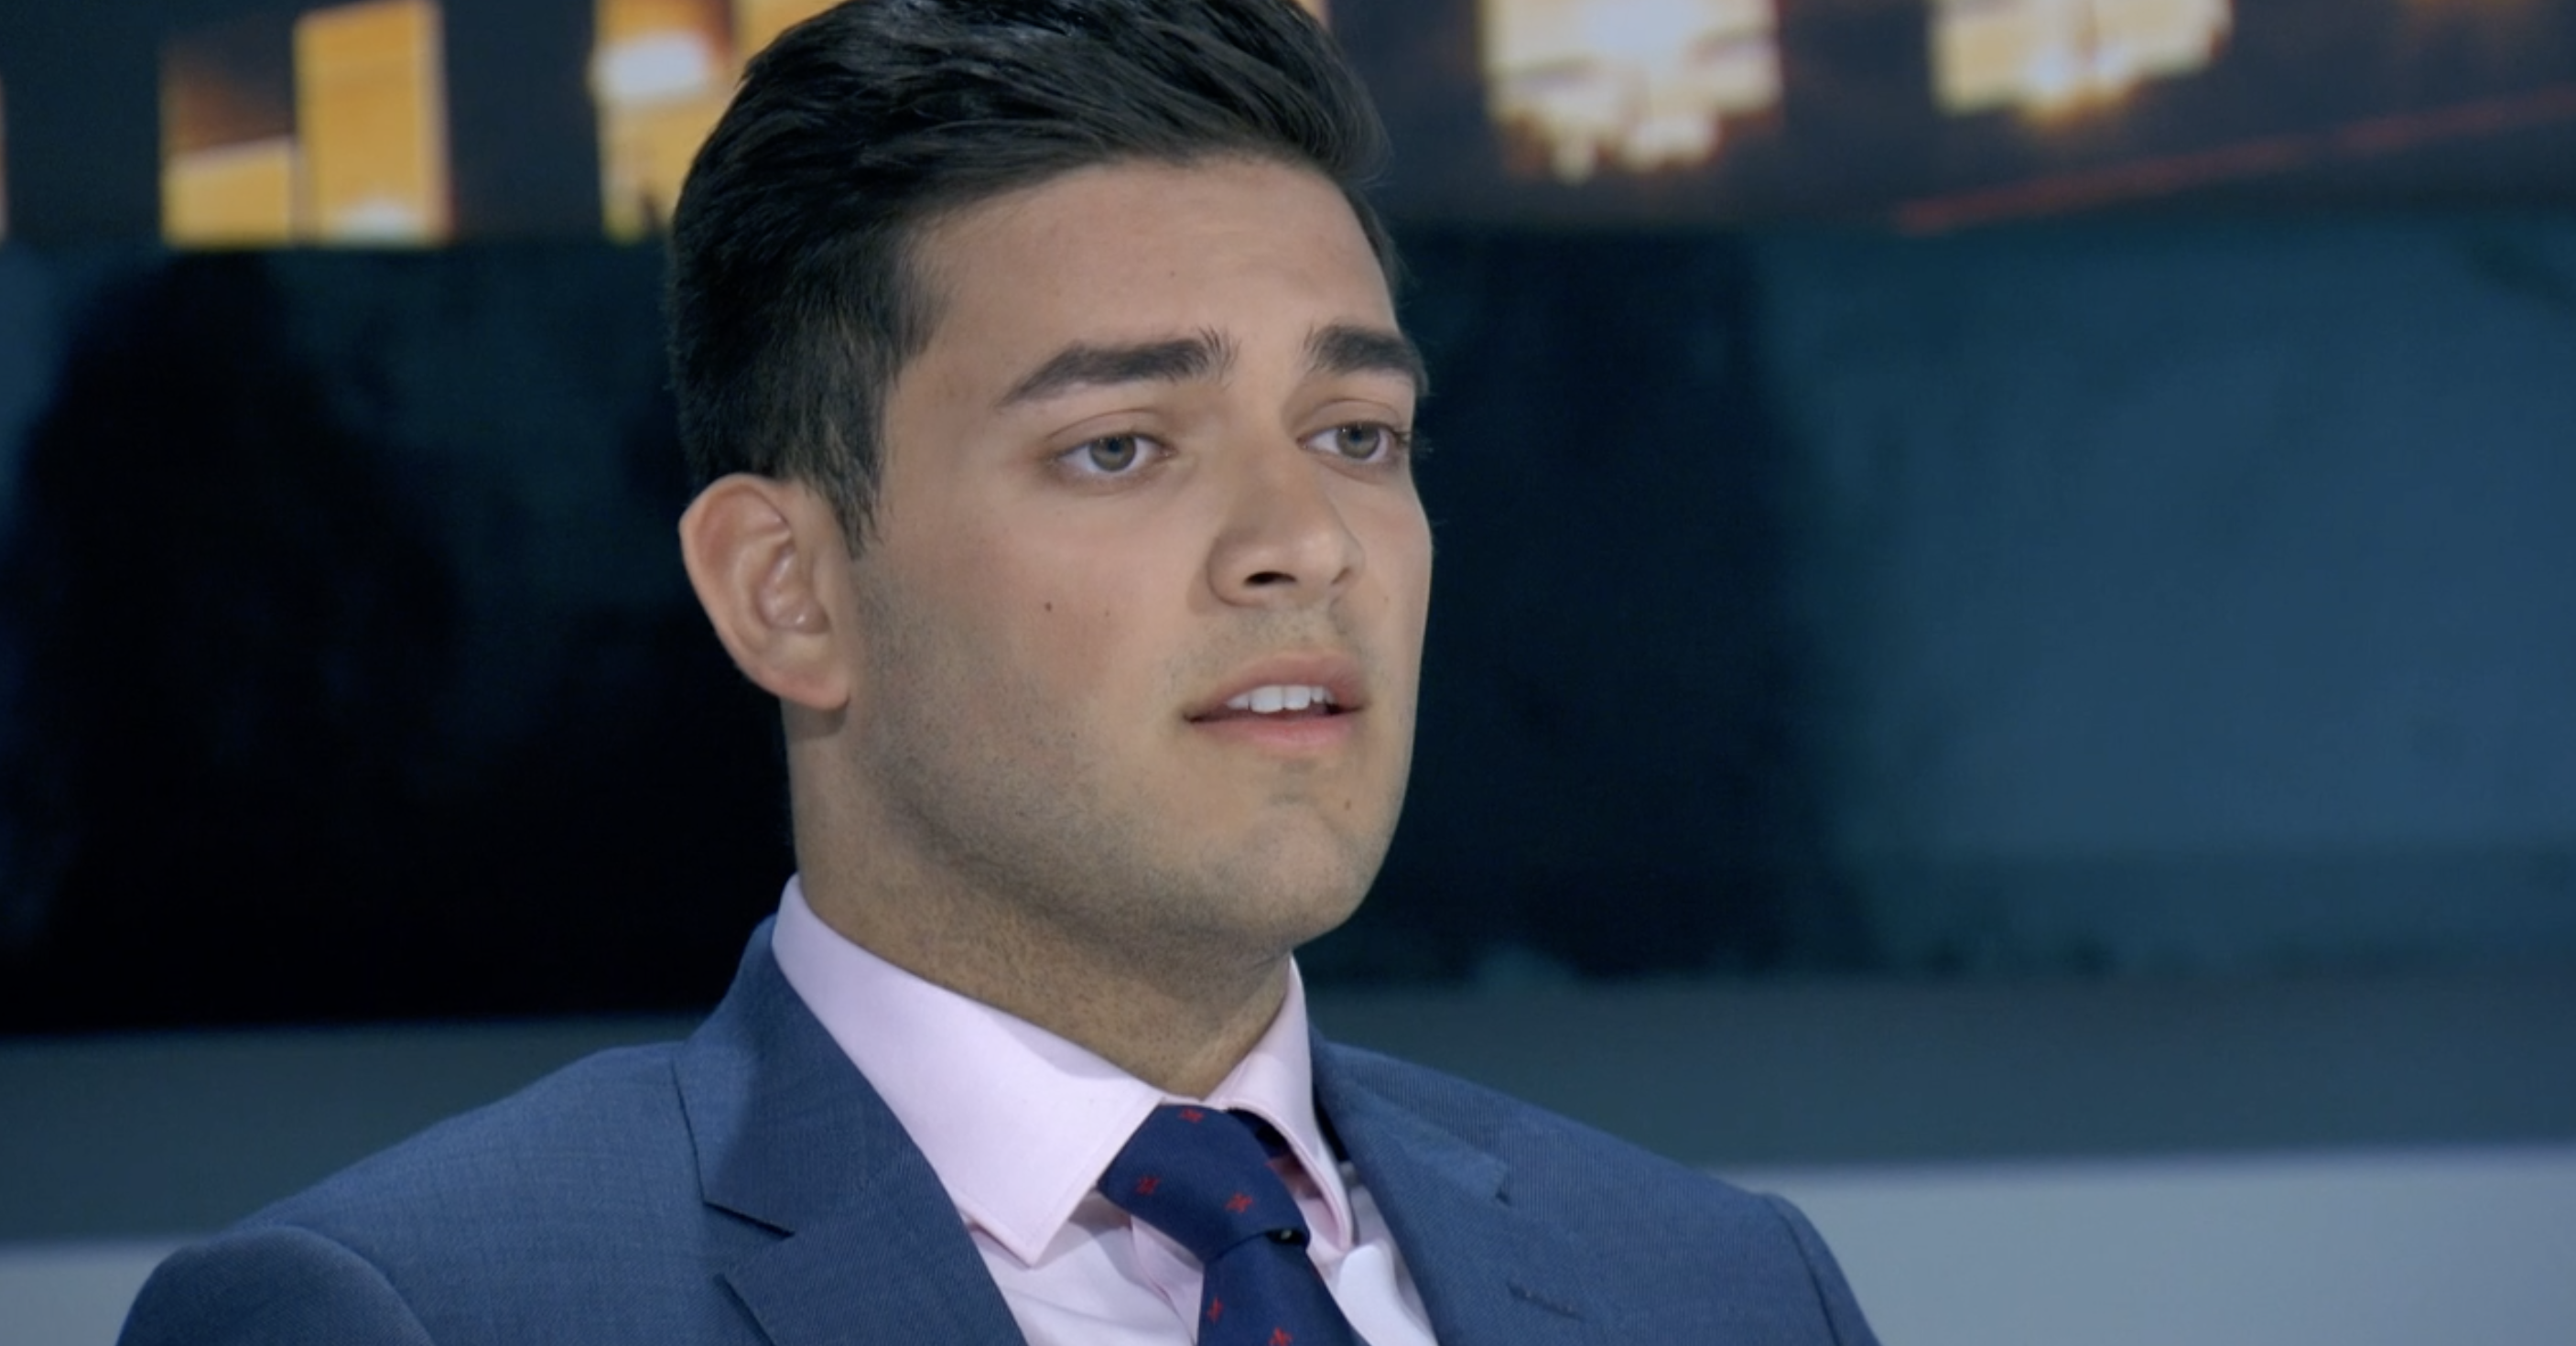 Is The Apprentice scripted? 2019 contestant Dean Ahmad reveals everything!